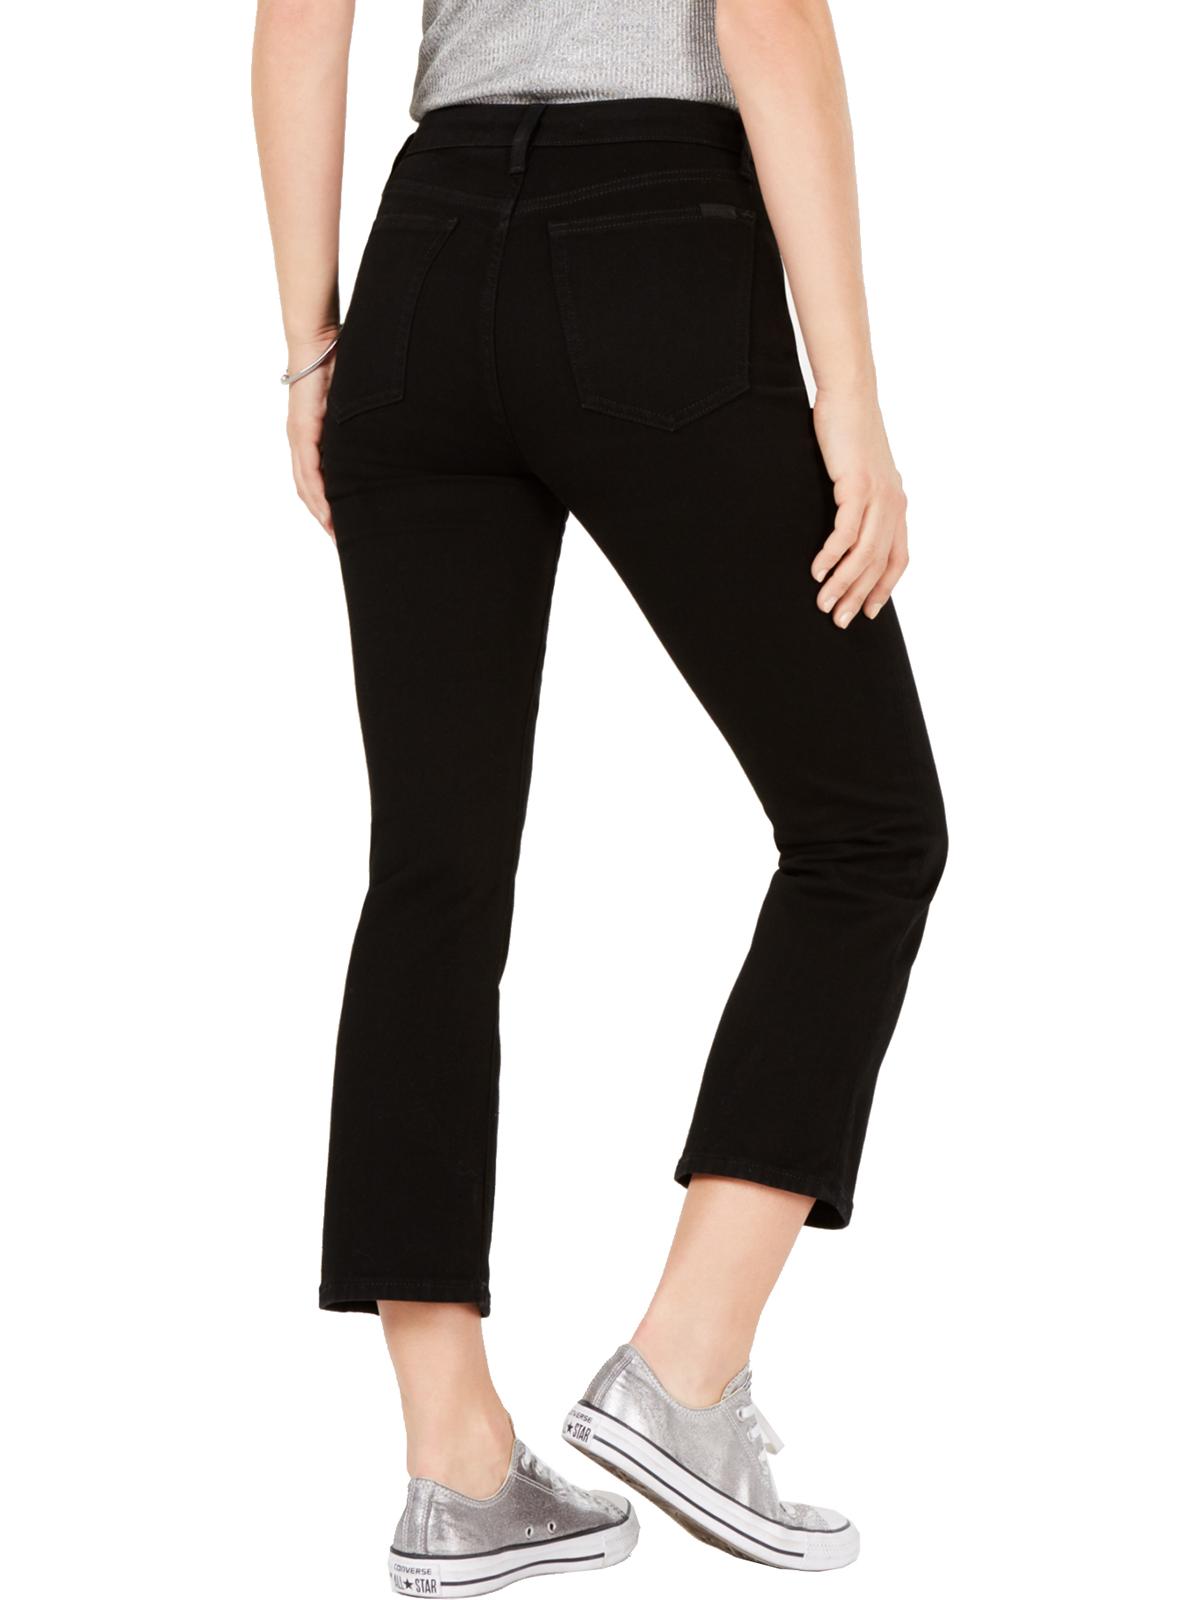 Joe's Jeans Womens The Callie Denim High Rise Cropped Jeans - image 2 of 2